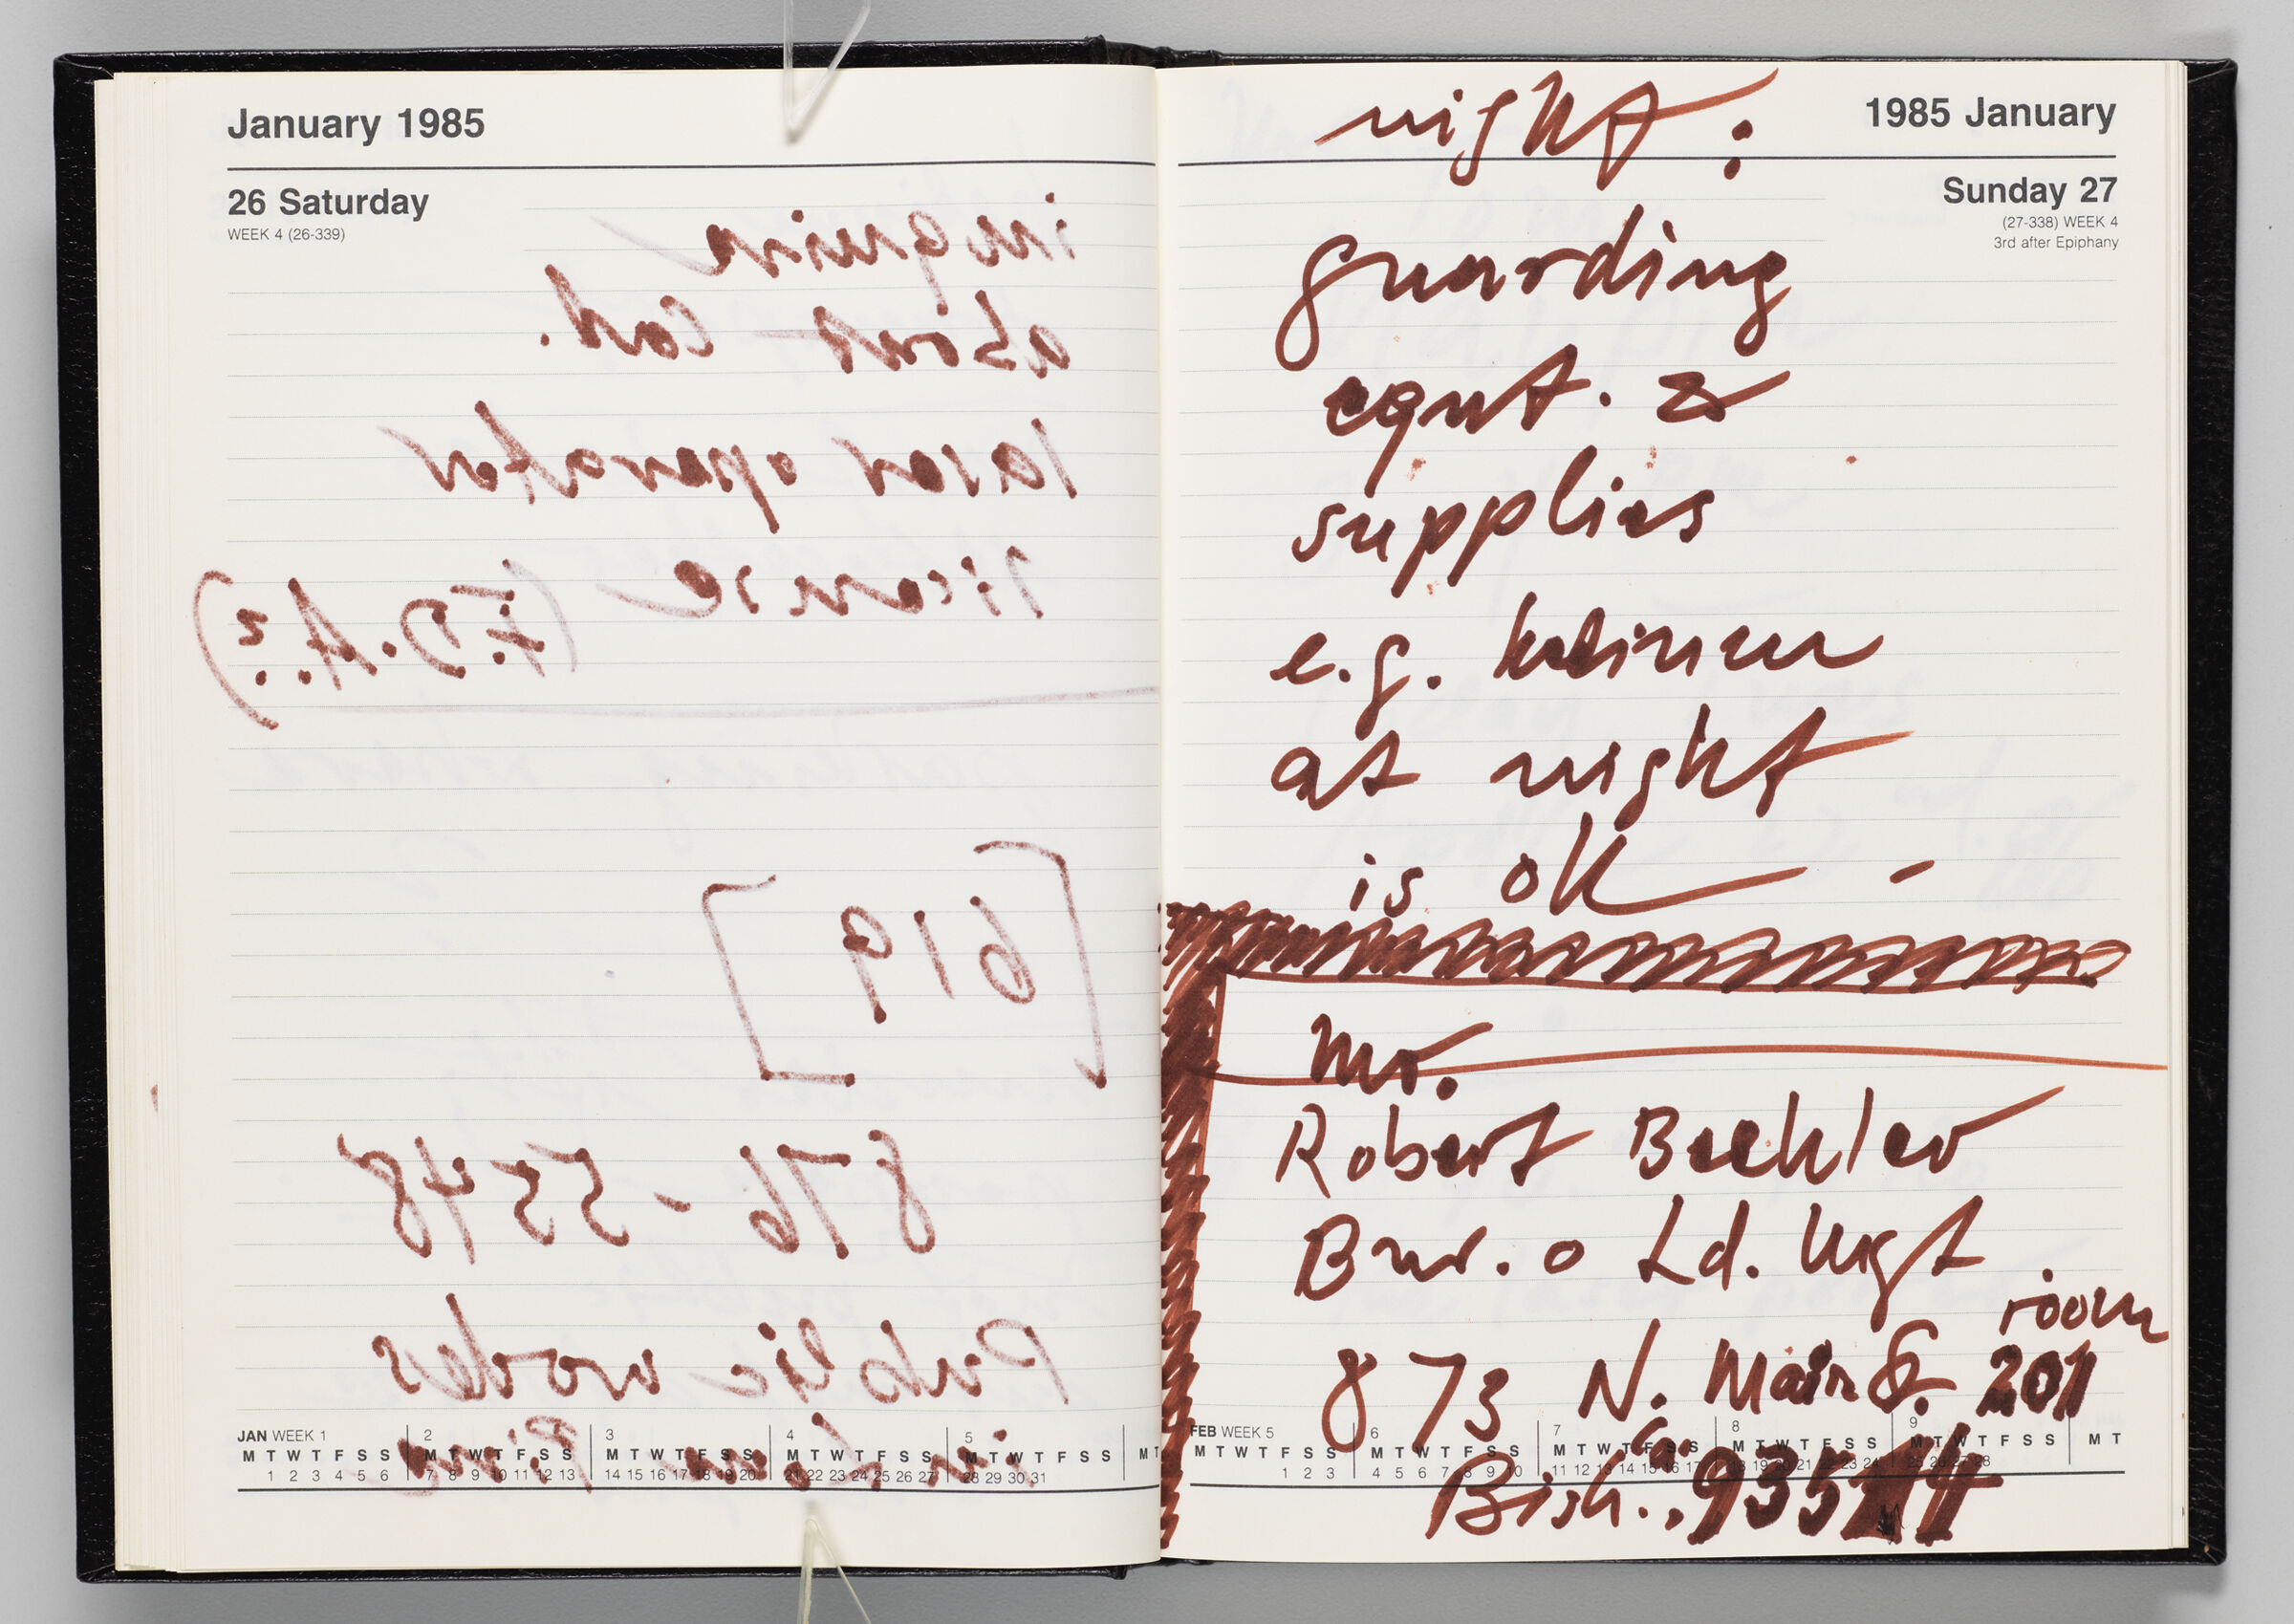 Untitled (Bleed-Through Of Previous Page, Left Page); Untitled (Notes On Calendar Page January 27, 1985, Right Page)